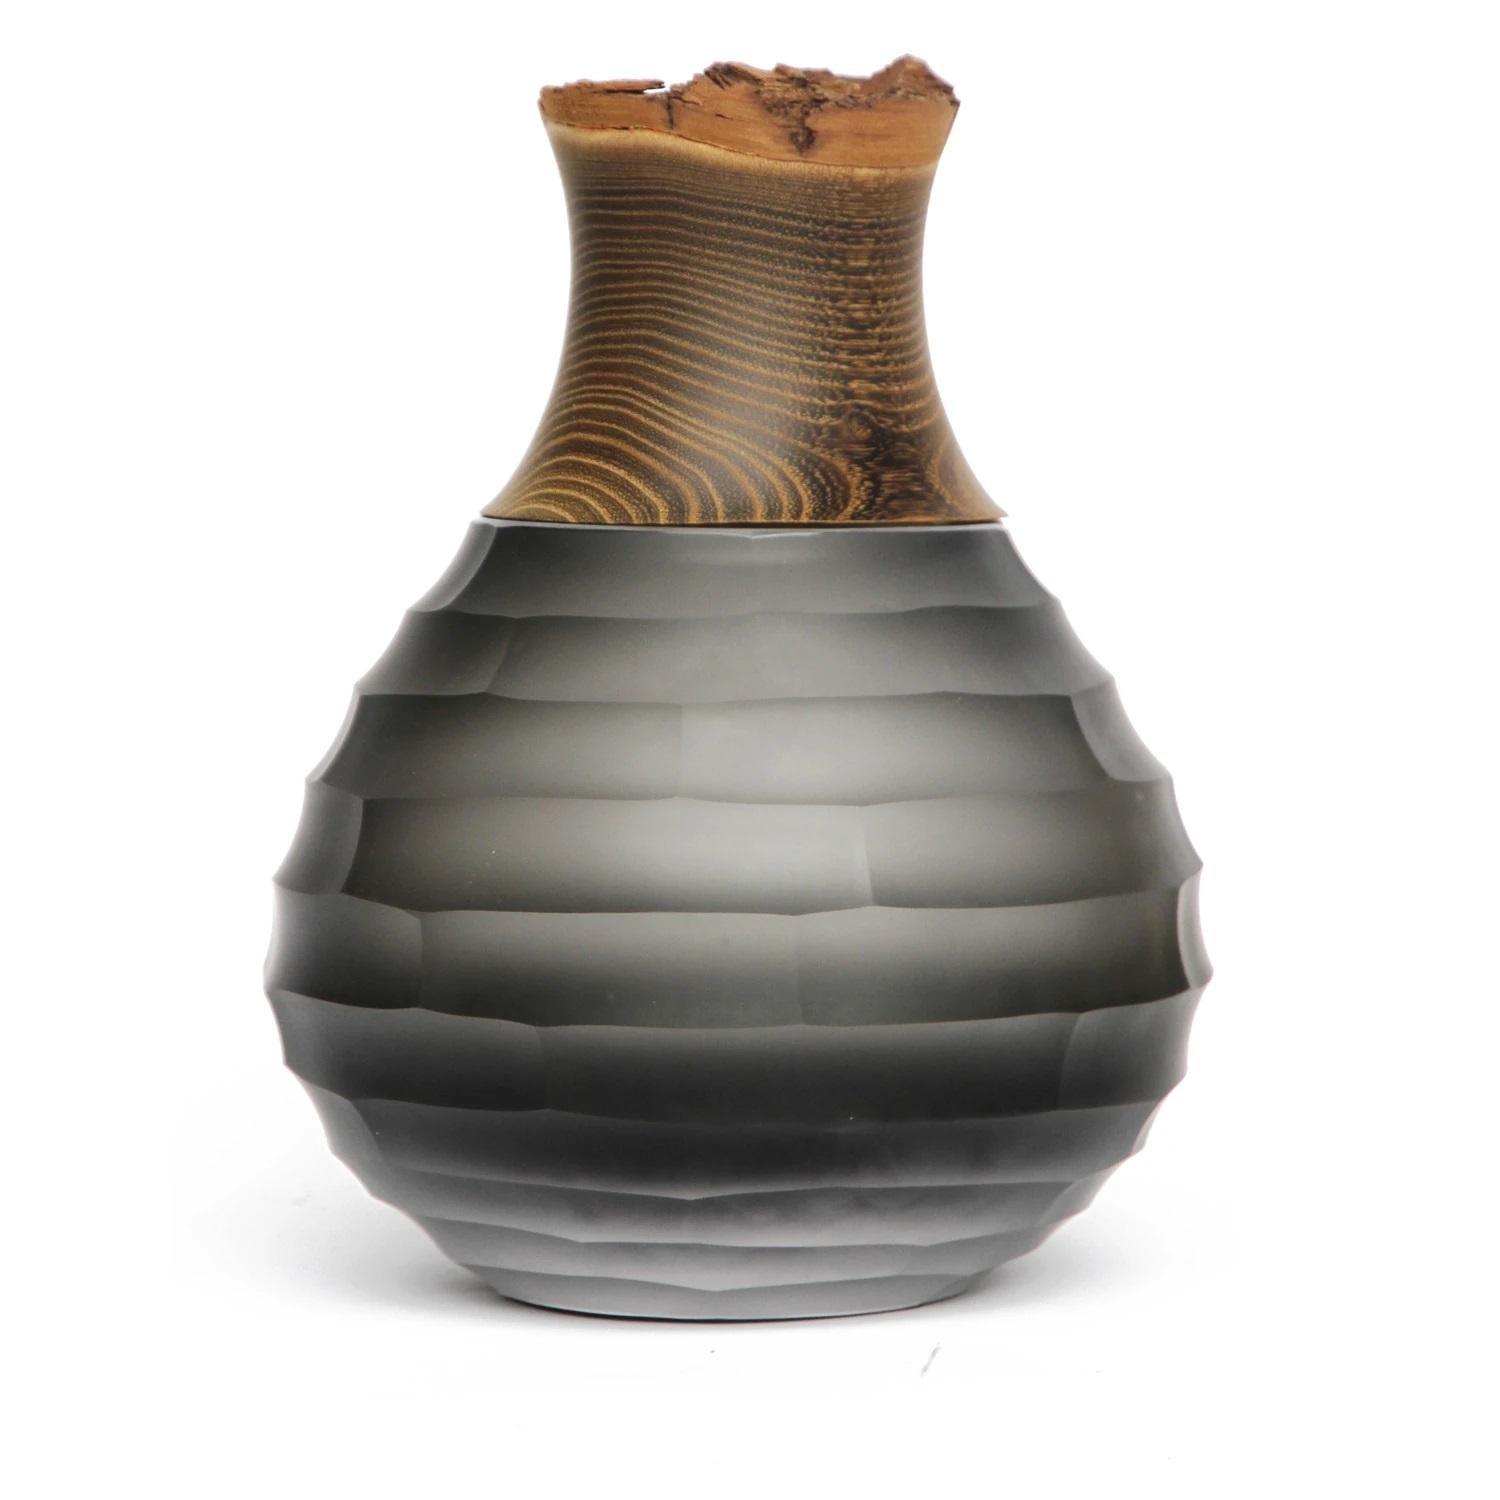 Grey sculpt stacking vessel, Pia Wüstenberg
Dimensions: D 23 x H 30.
Materials: cut glass, wood
Available in other colors.

A Stacking Vessel with large overlapping diamond wheel cuts ranging from rough to fine.
Handmade in Europe: hand blown and